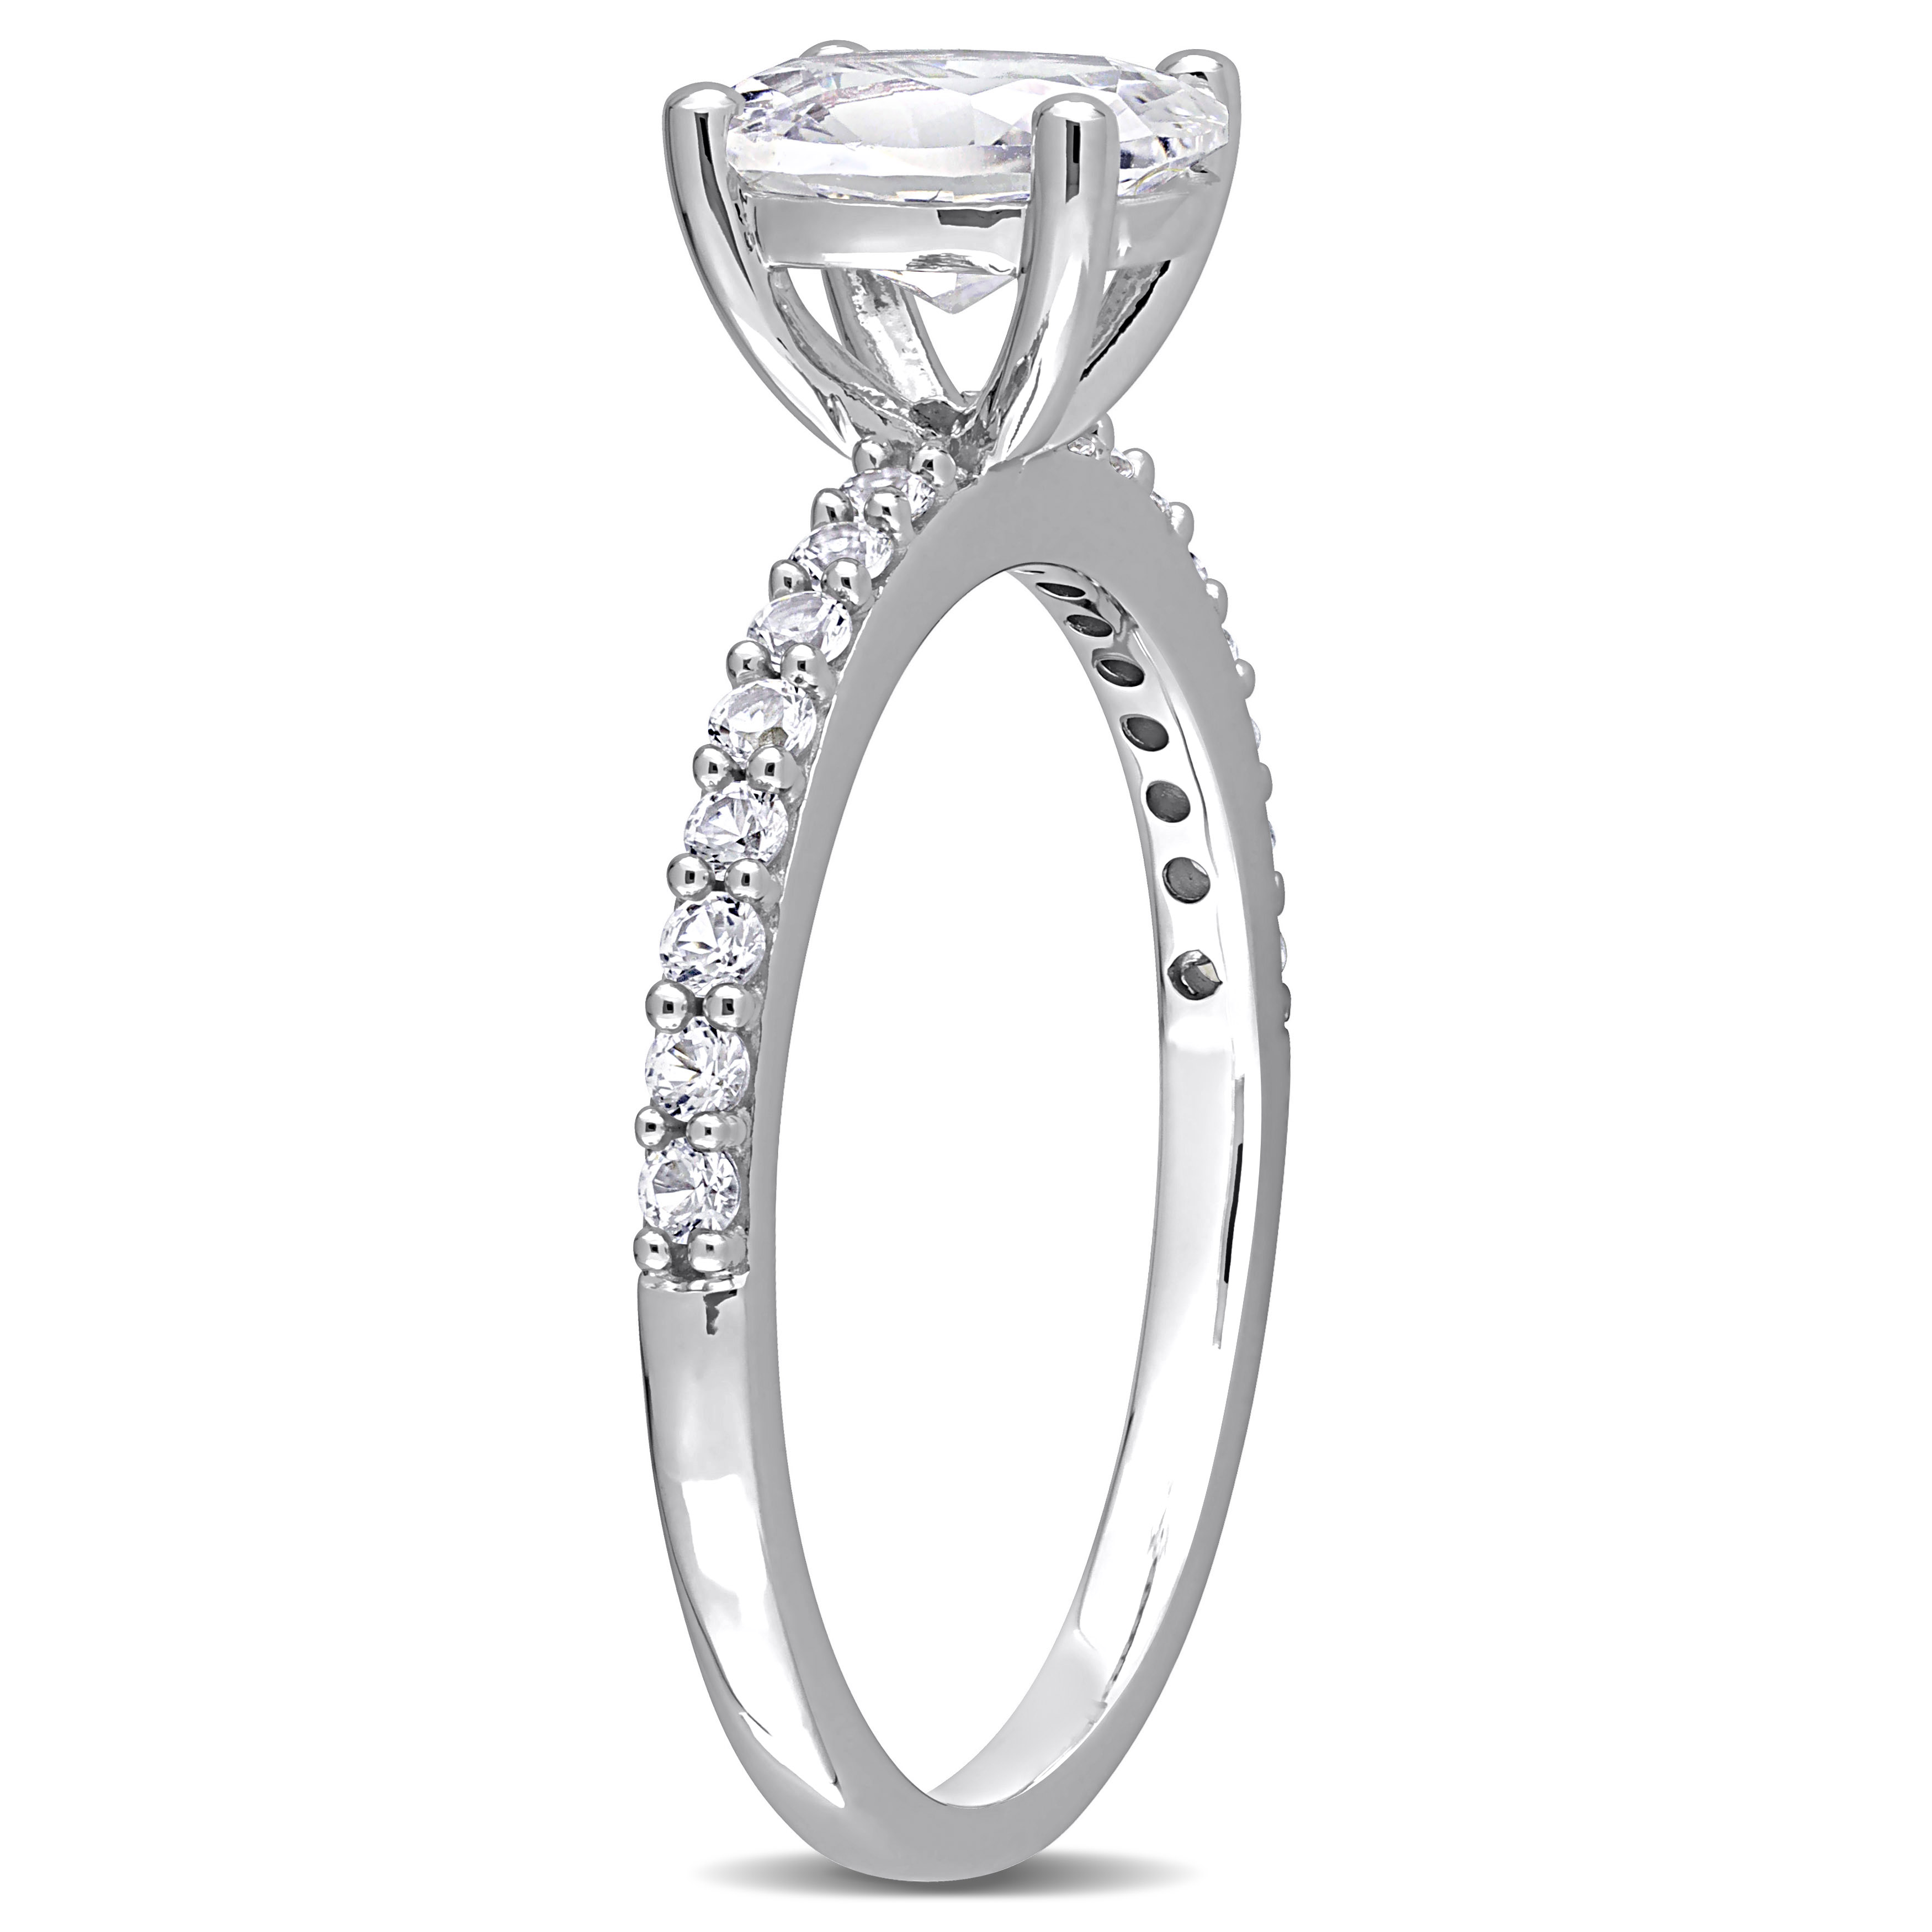 2 1/3 CT TGW Oval Shape Created White Sapphire Solitaire Engagement Ring in 10k White Gold